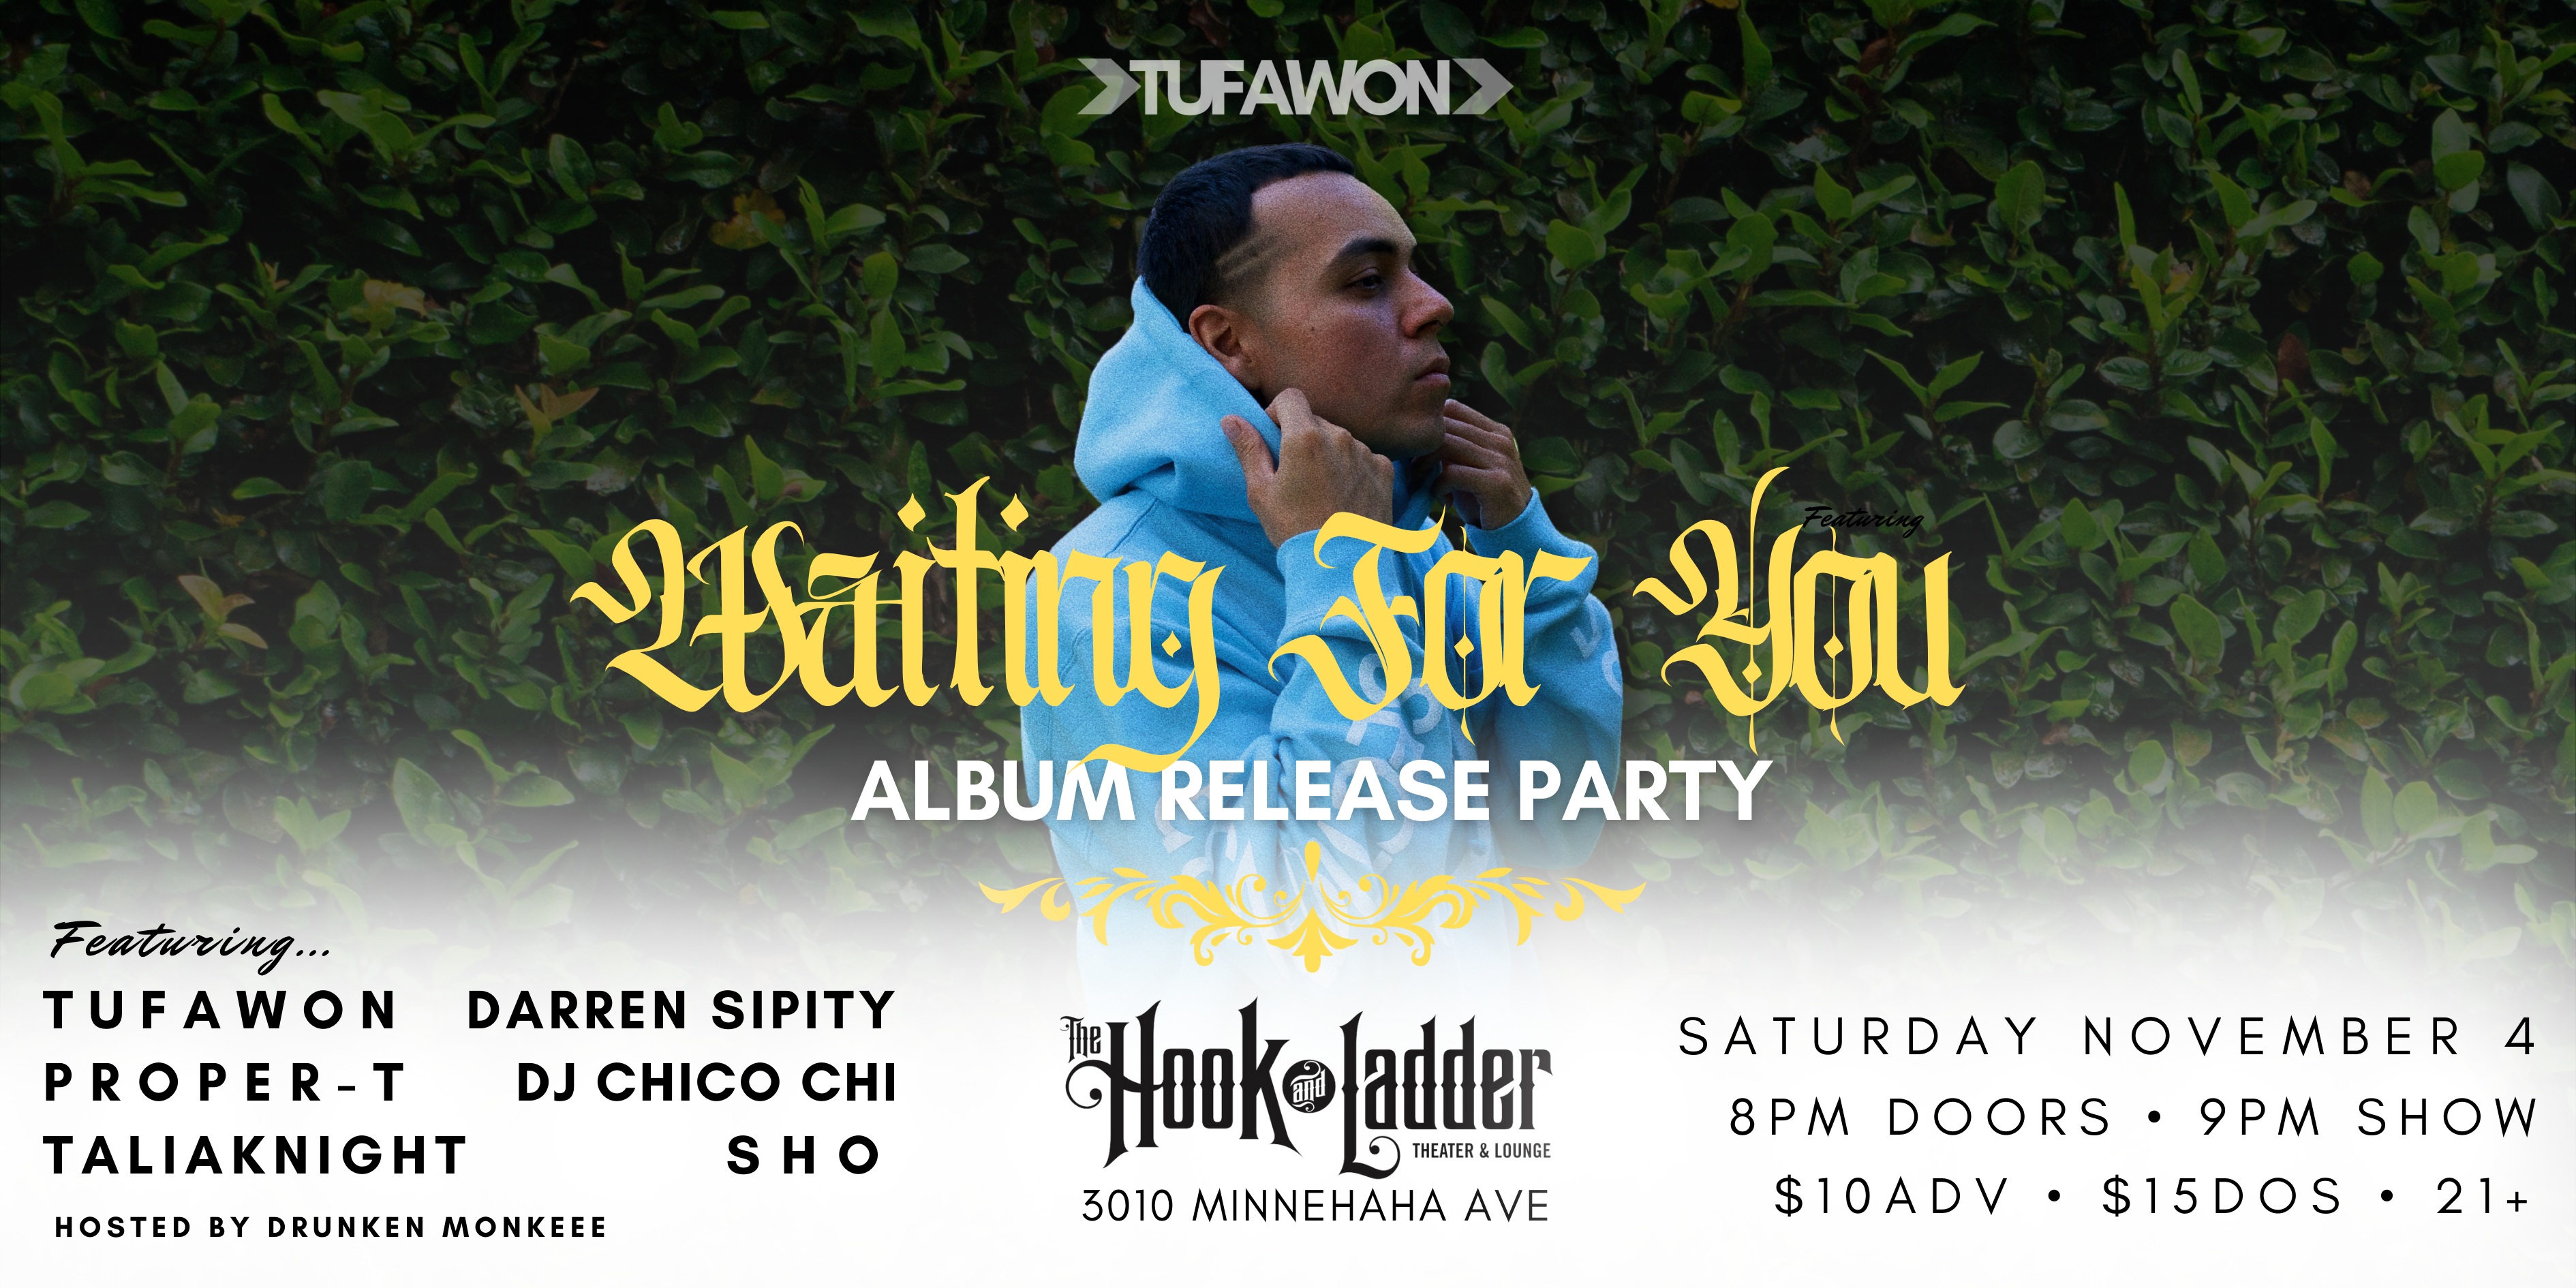 Tufawon's "Waiting For You" Album Release Party Tufawon Proper-T TaliaKnight Darren Sipity DJ Chico Chi Sho Hosted By Drunken Monkeee Saturday November 4 The Hook and Ladder Theater Doors 8:00pm :: Music 9:00pm :: 21+ General Admission $10 ADV / $15 DOS TICKETS ON SALE NOW